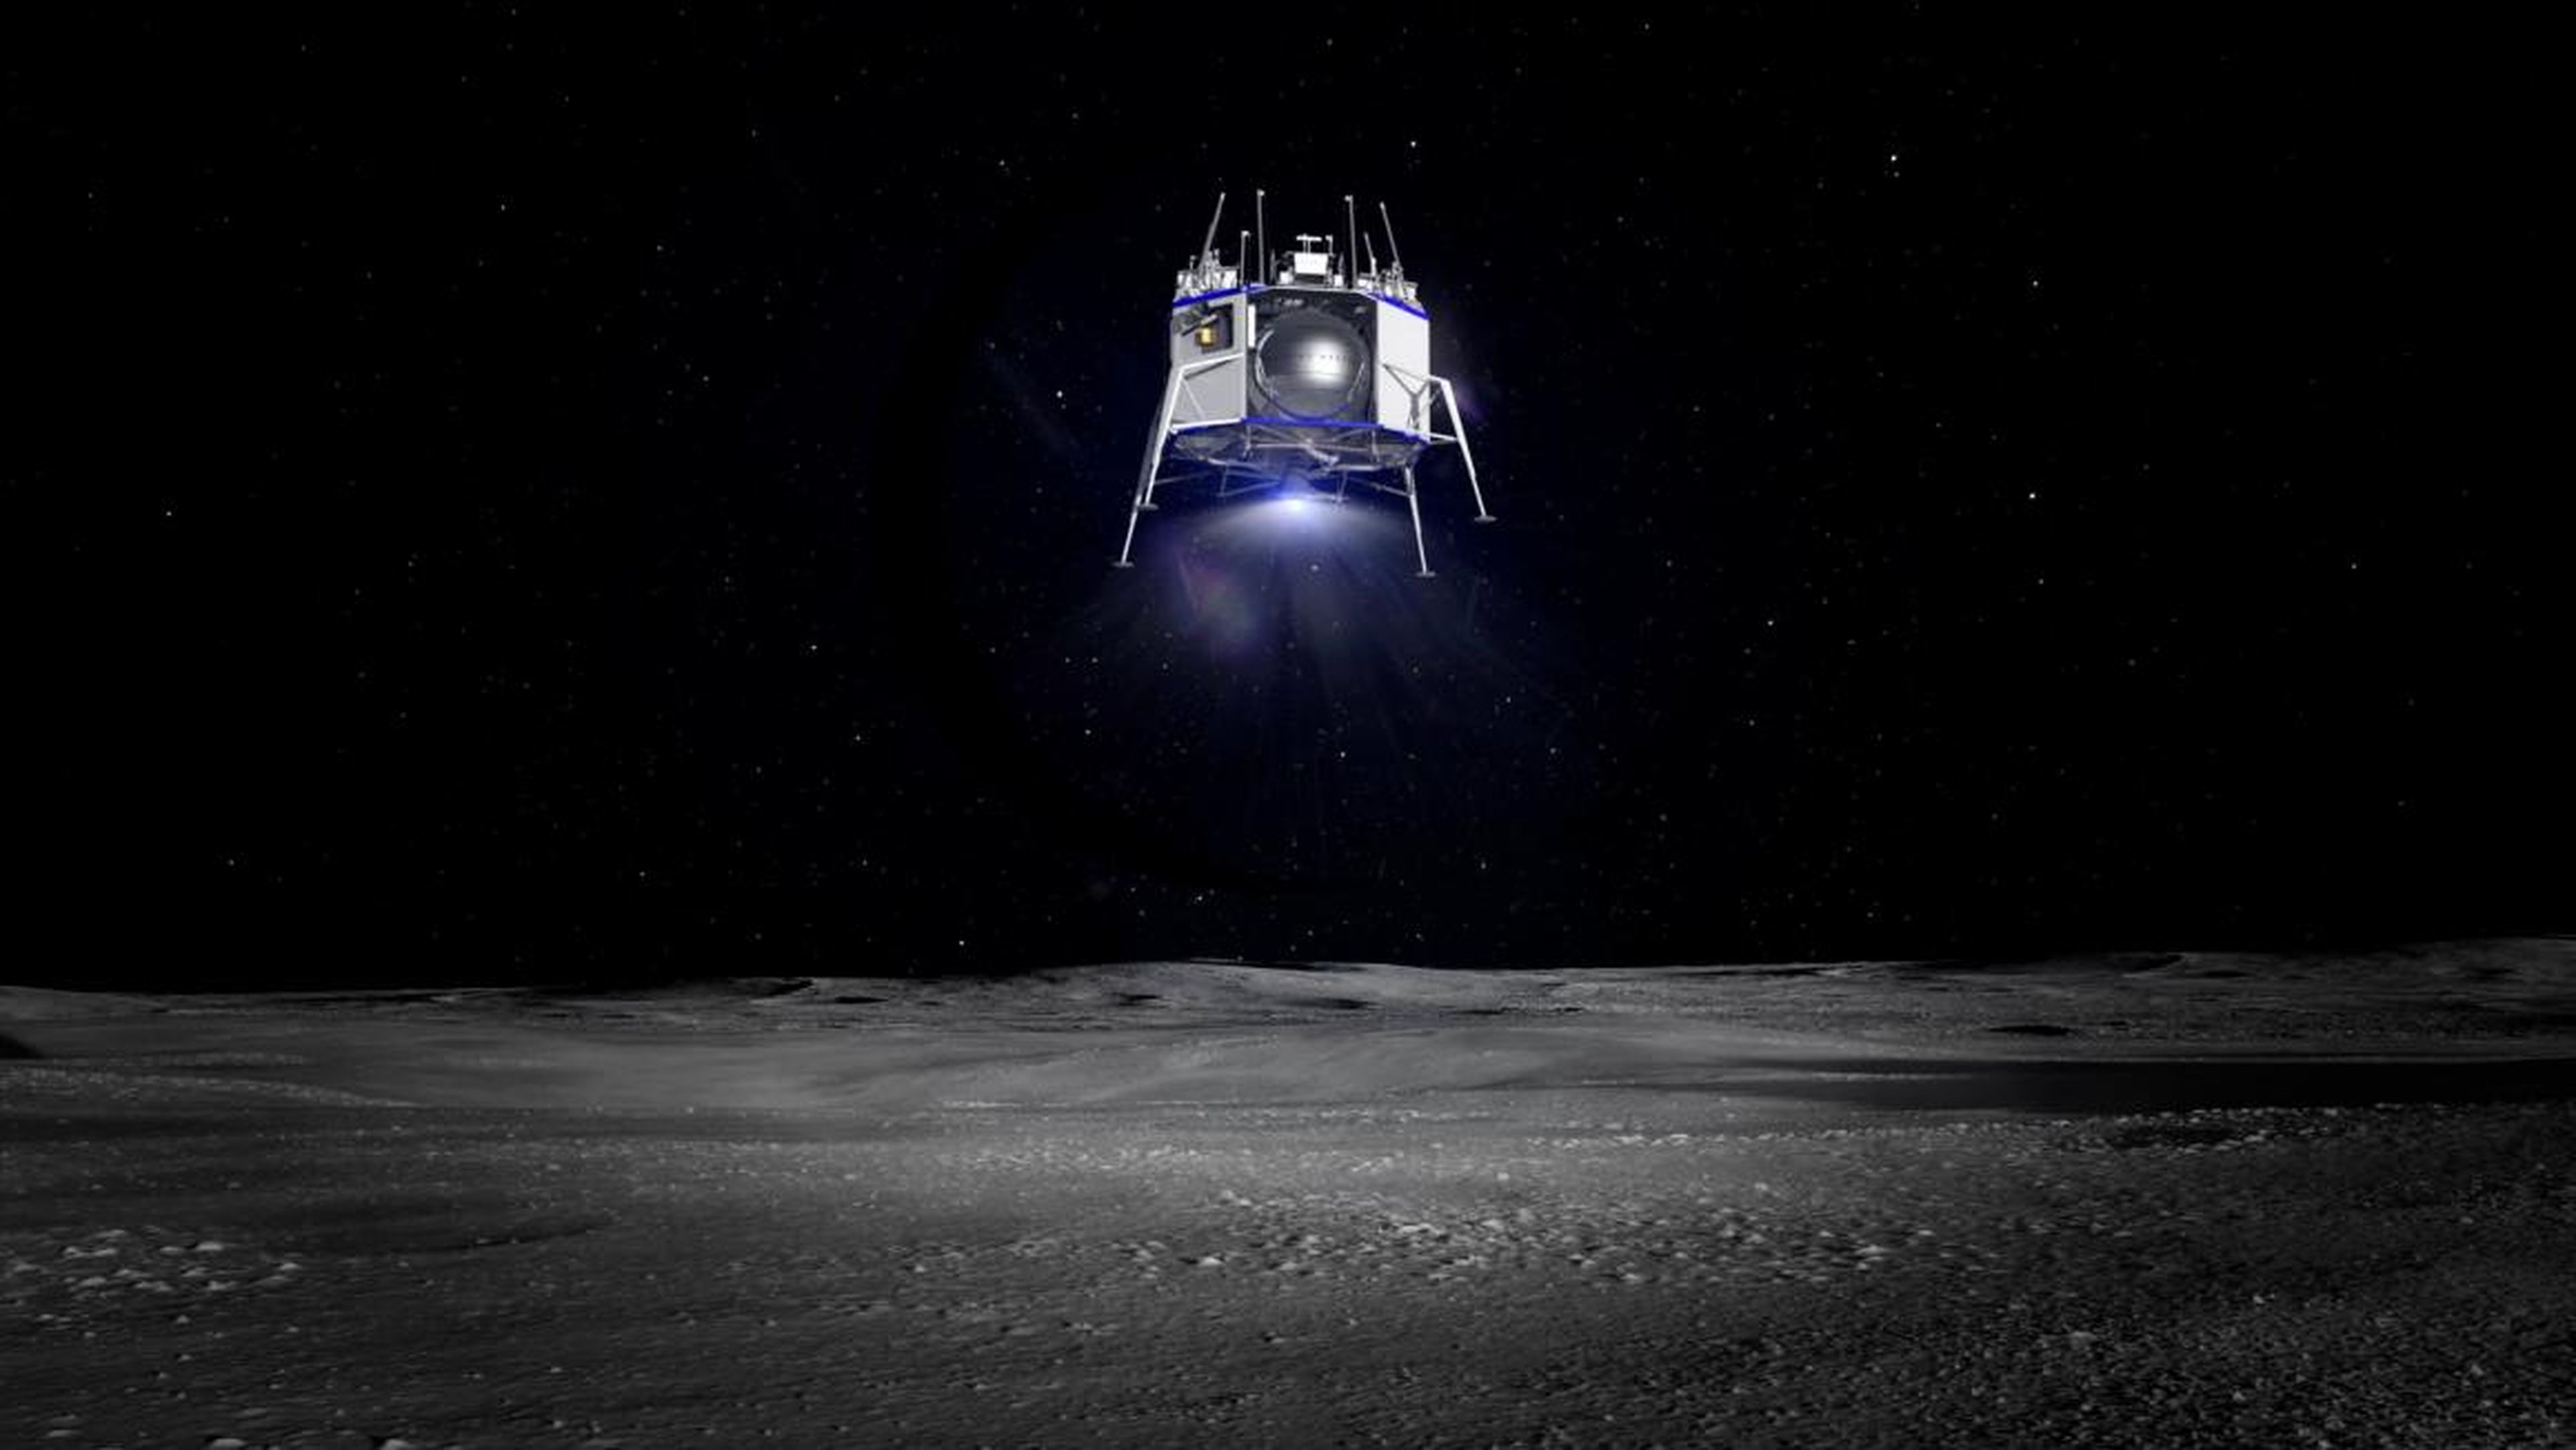 The first Blue Moon landers should be able to drop off up to 4 tons (3.6 metric tonnes) of payload. The top deck, Bezos said, is also flat and highly configurable for maximum flexibility.